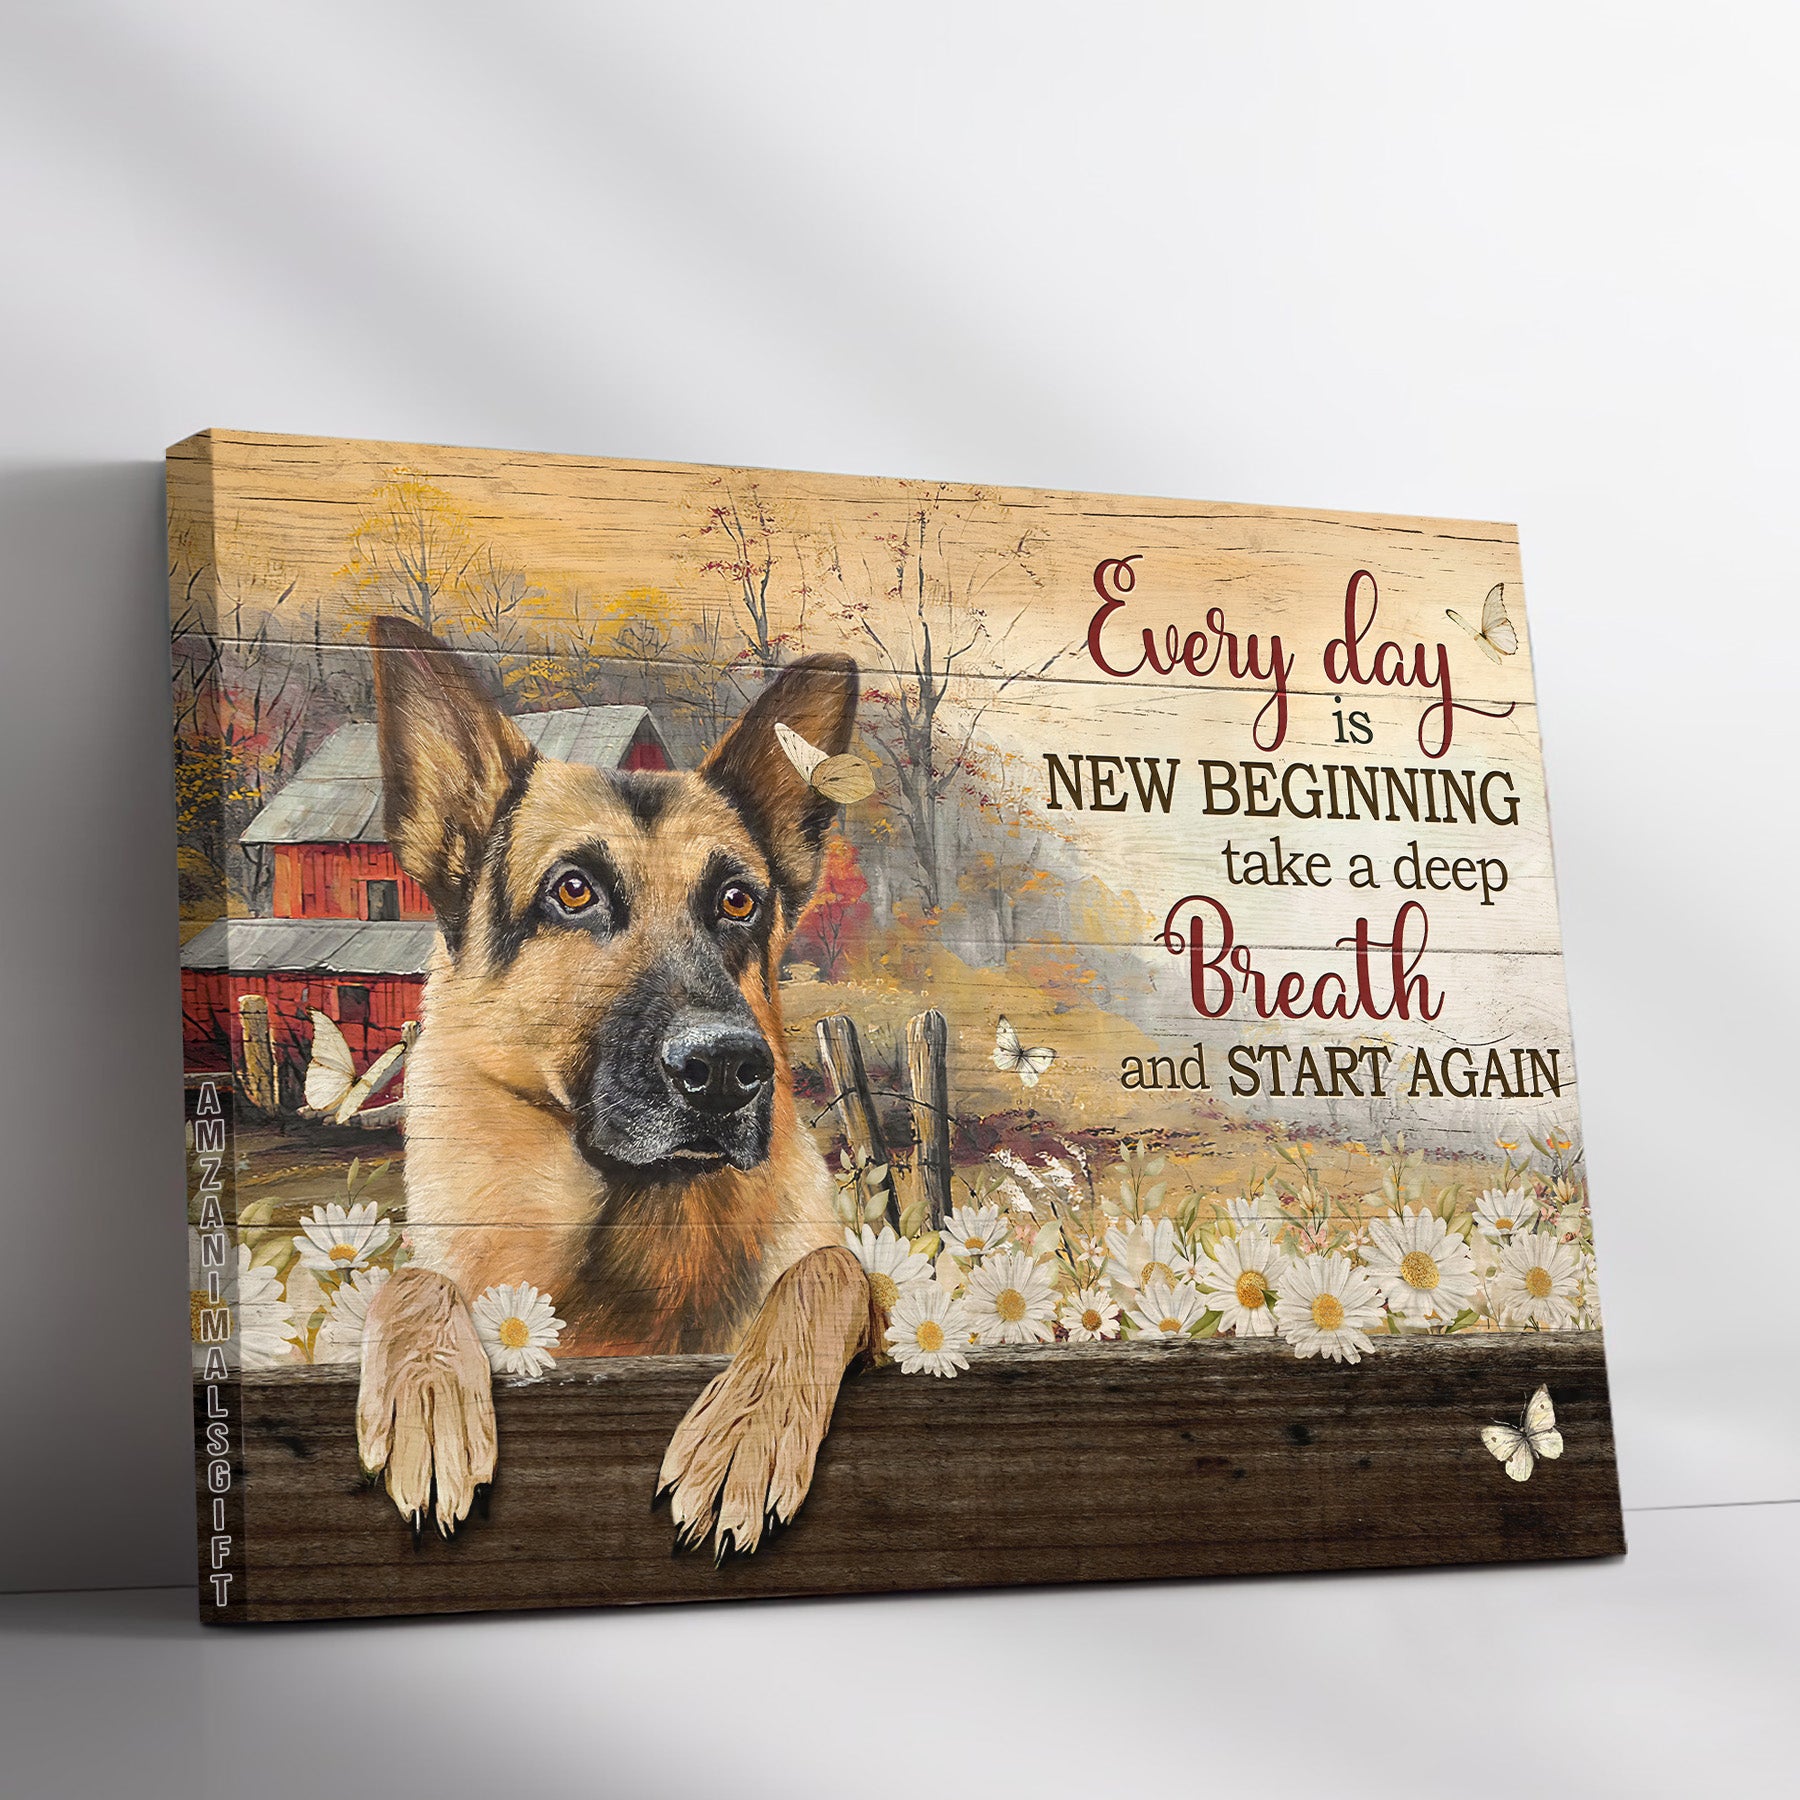 German Shepherd & Jesus Premium Wrapped Landscape Canvas - German Shepherd, Pretty Daisy, Every Day Is A New Beginning - Gift For Christian, Dog Lovers